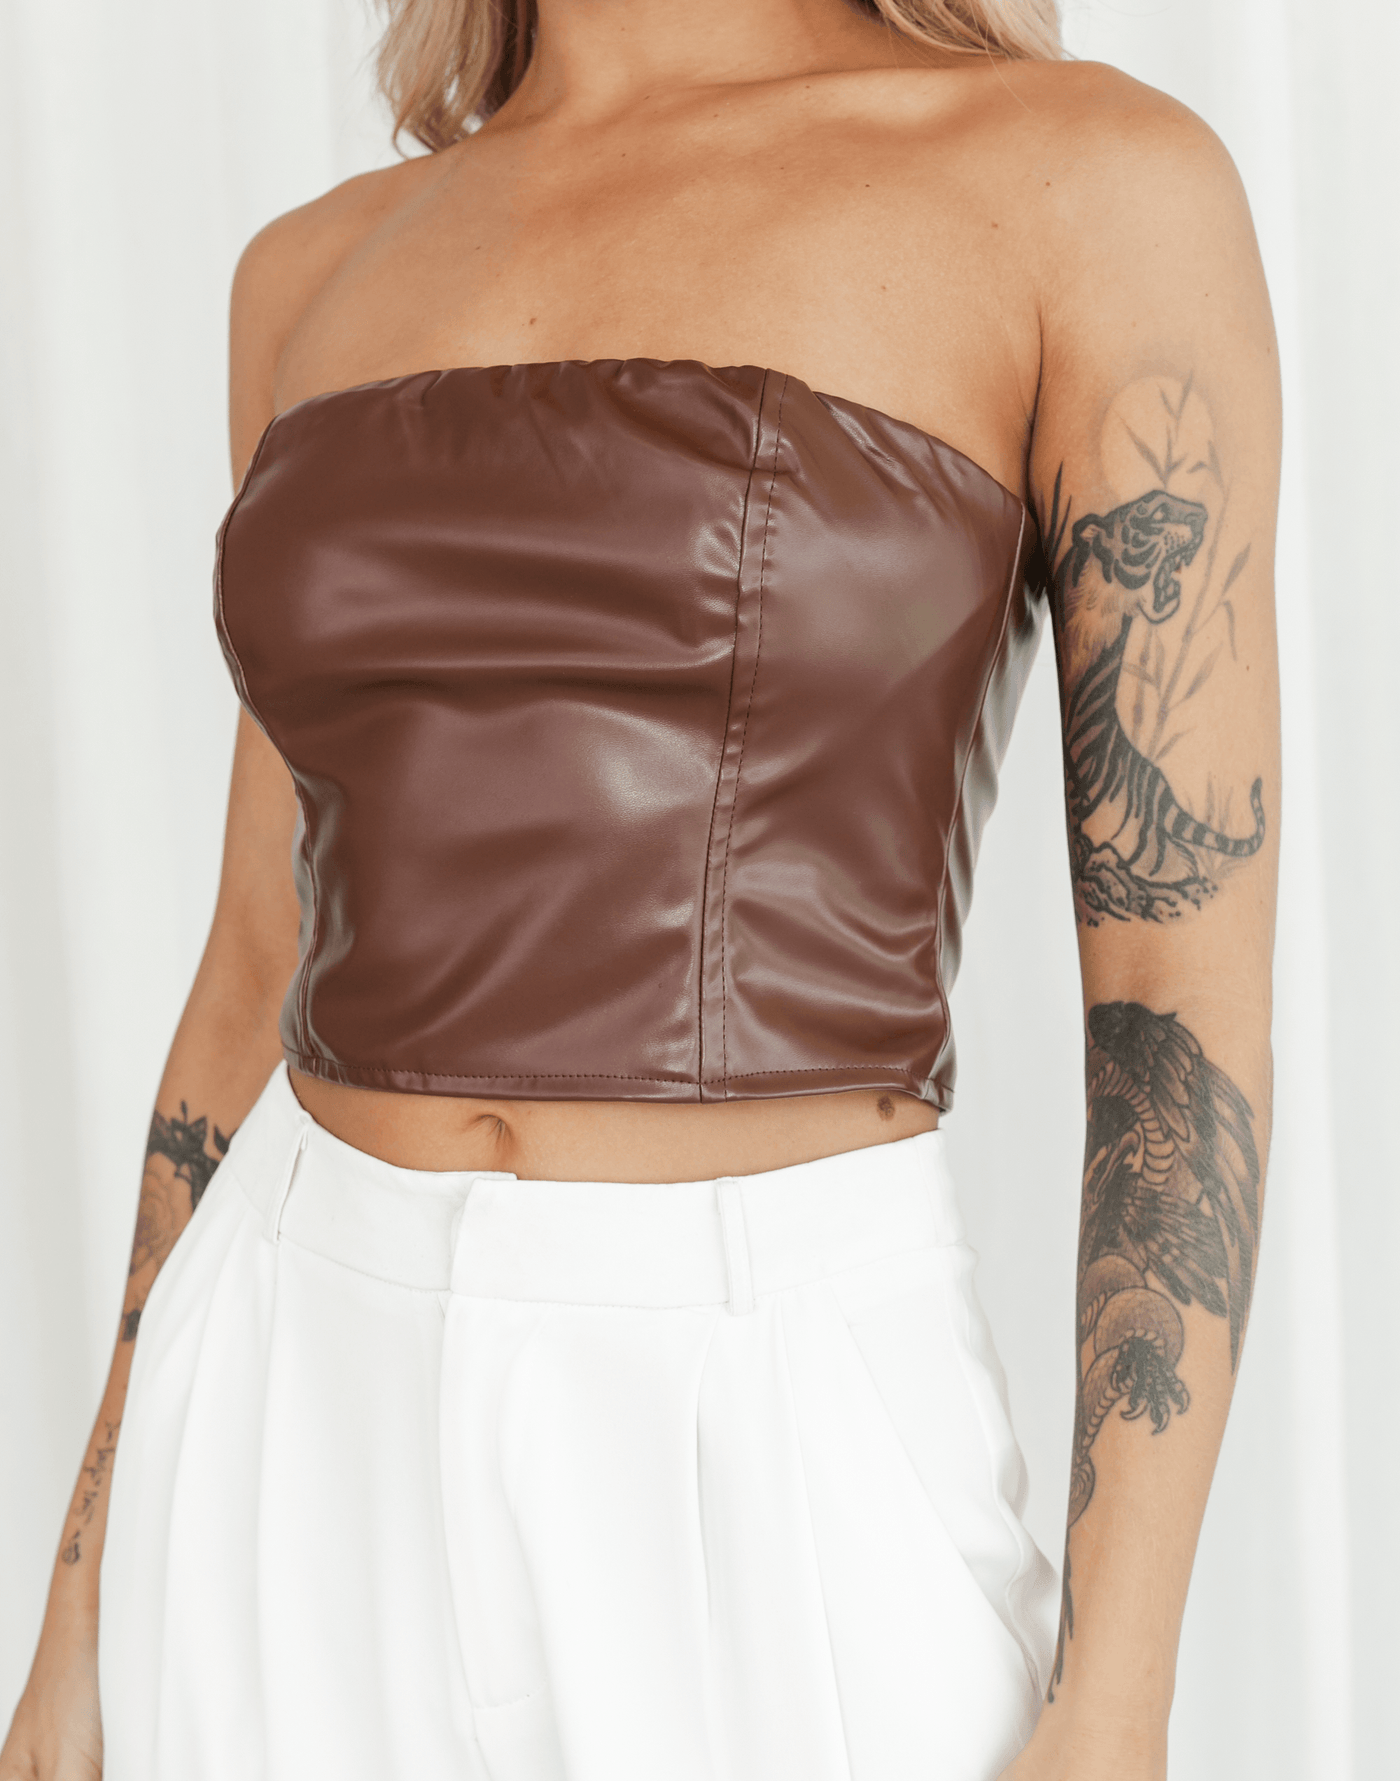 Maller Strapless Crop Top (Brown) - Brown Faux Leather Corset Top - Women's Top - Charcoal Clothing